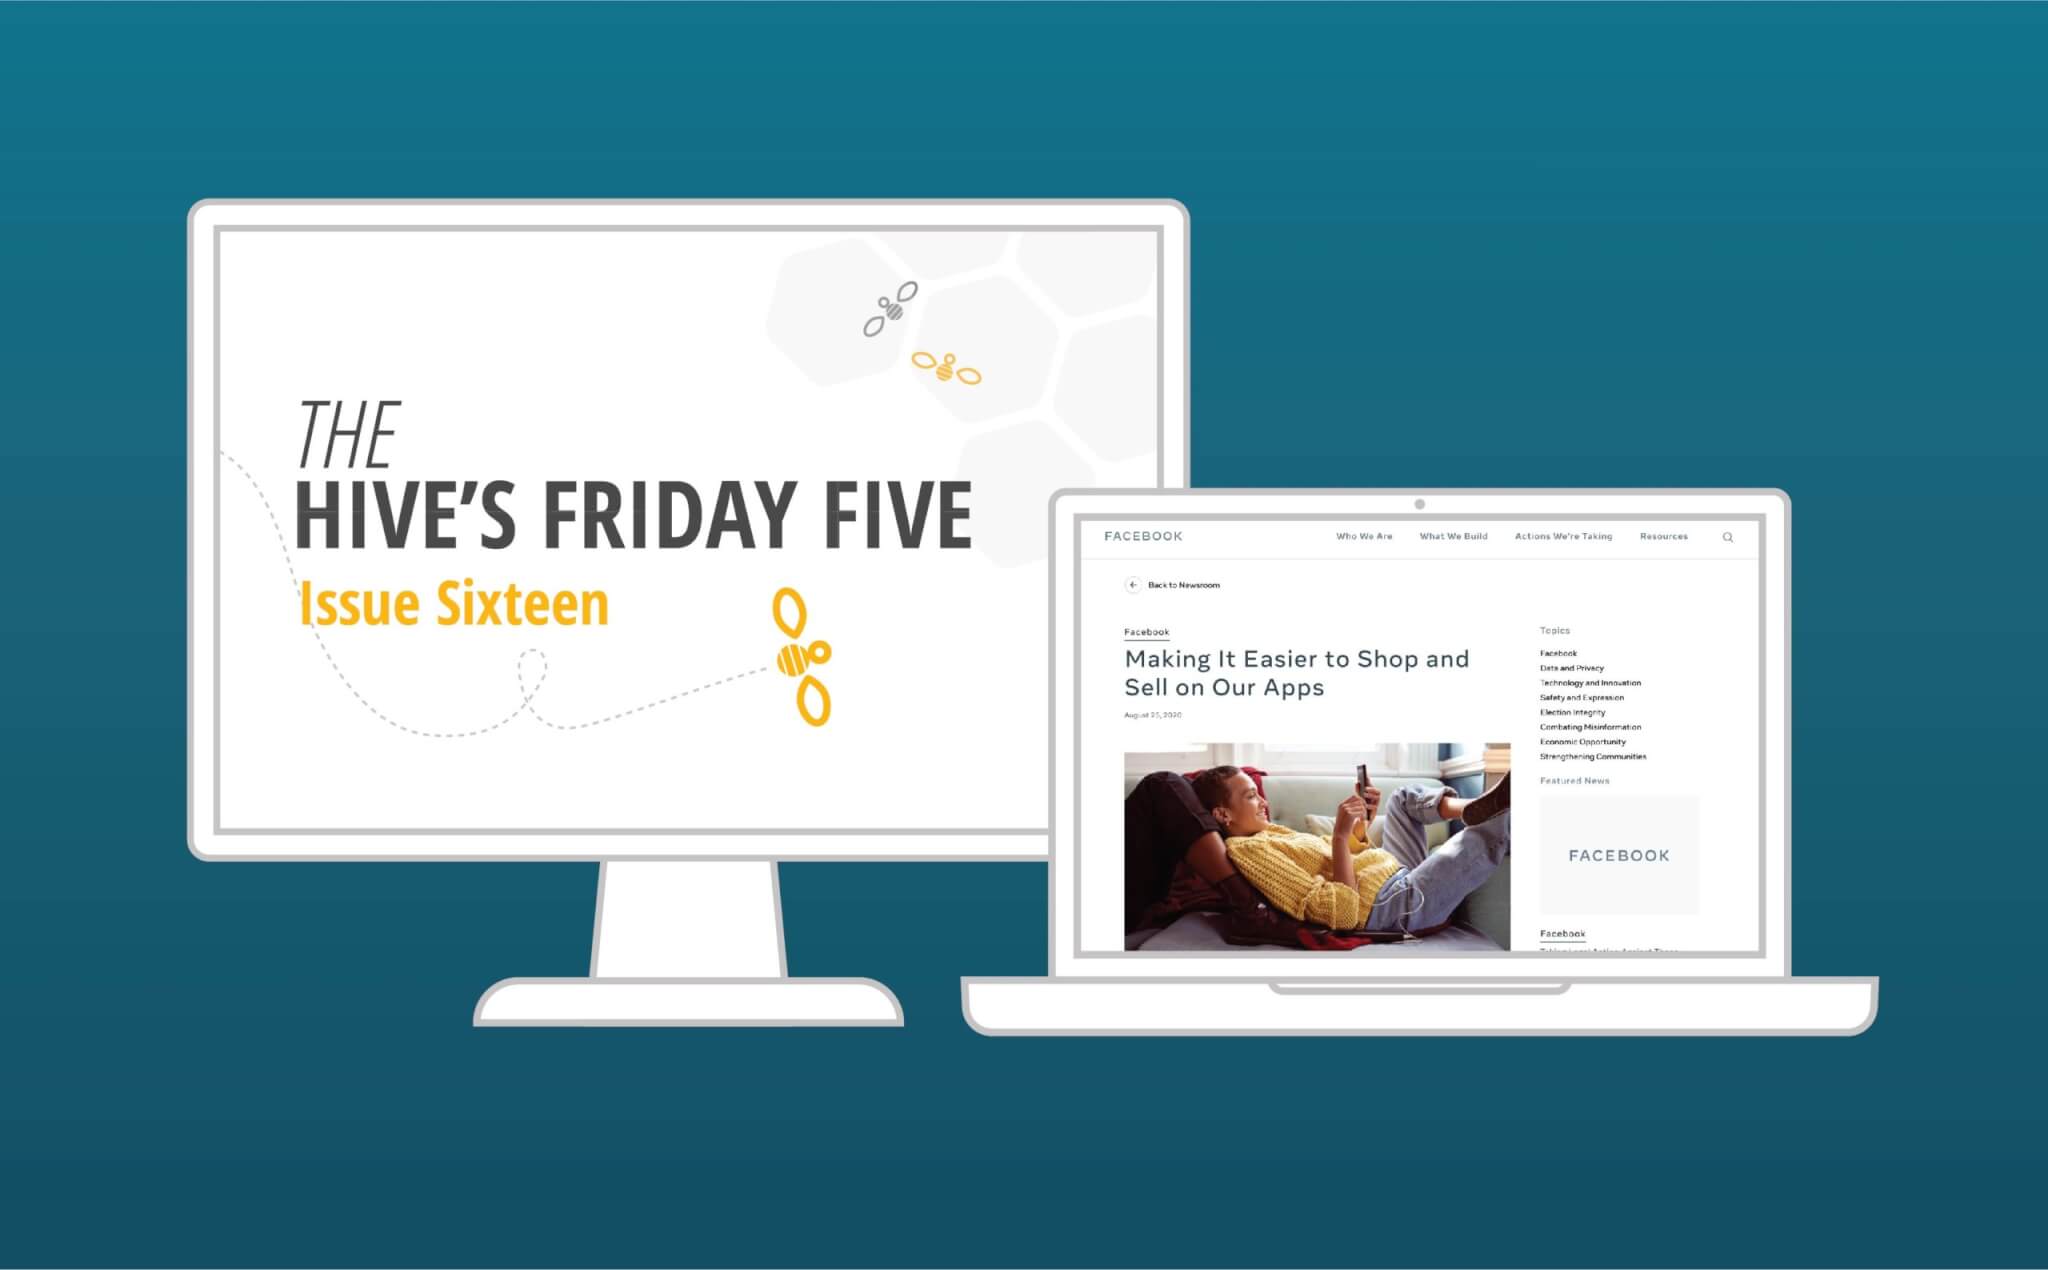 Blog-Image-The Hive’s Friday Five Issue 16